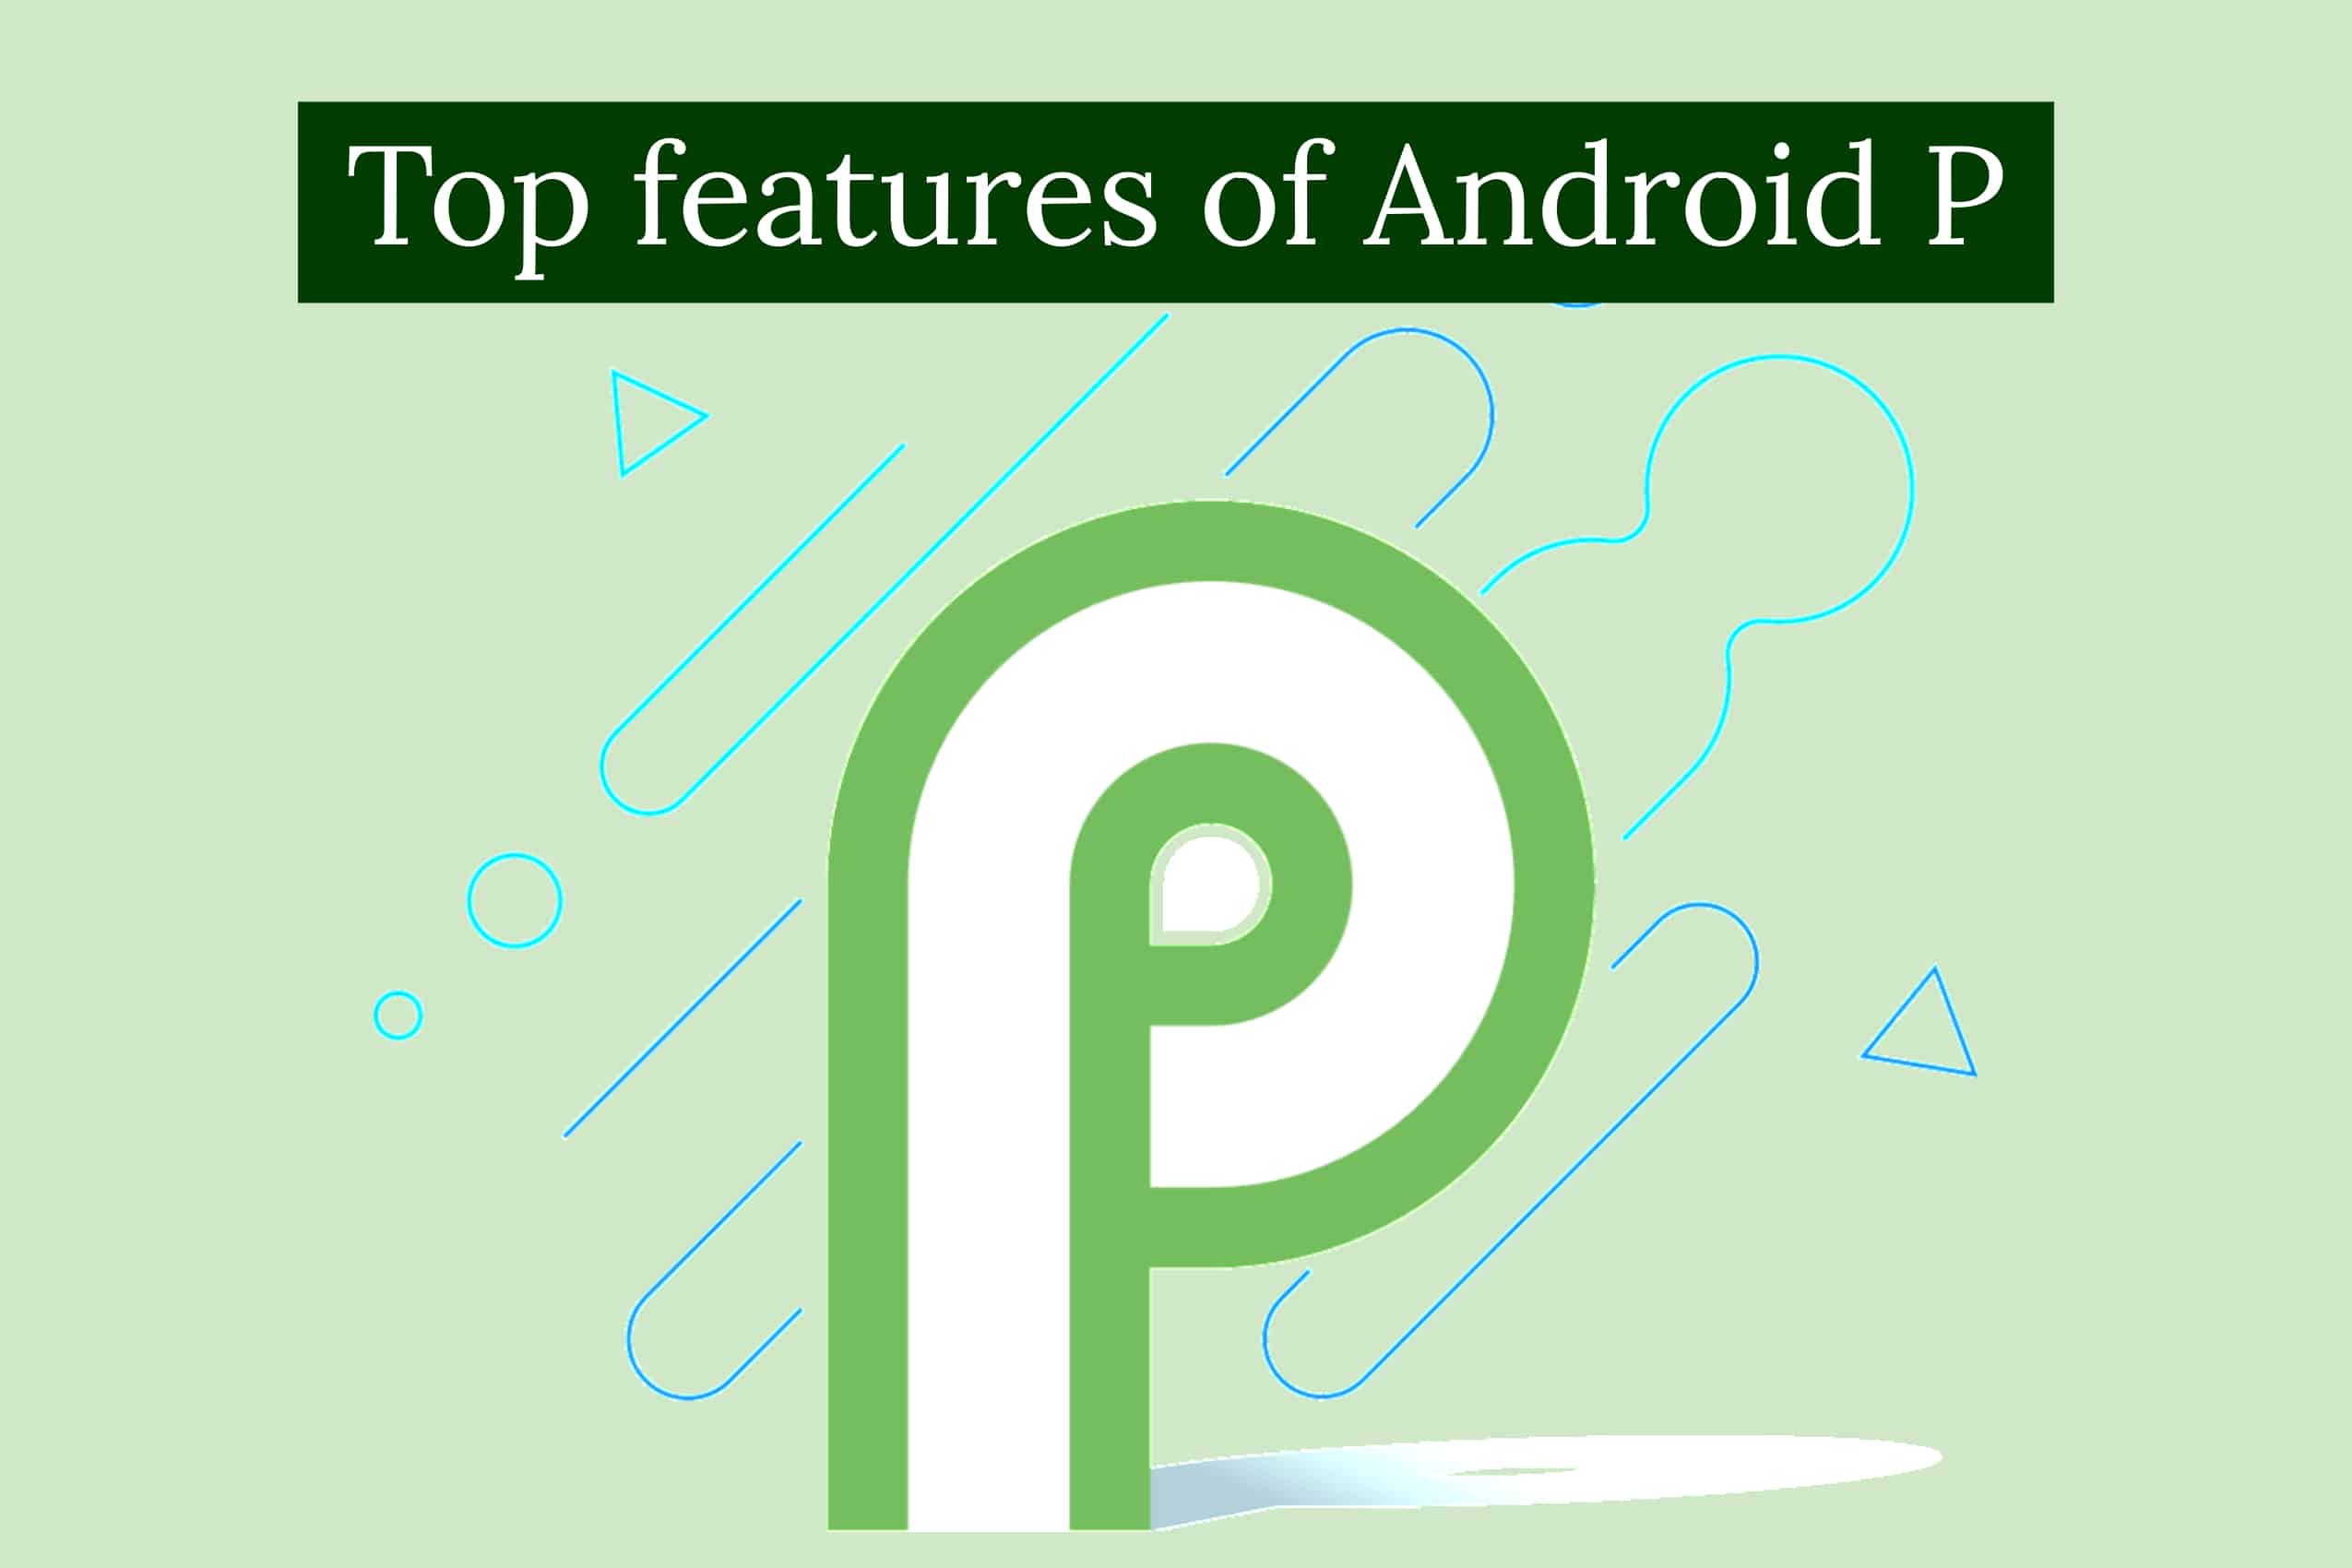 Android P features